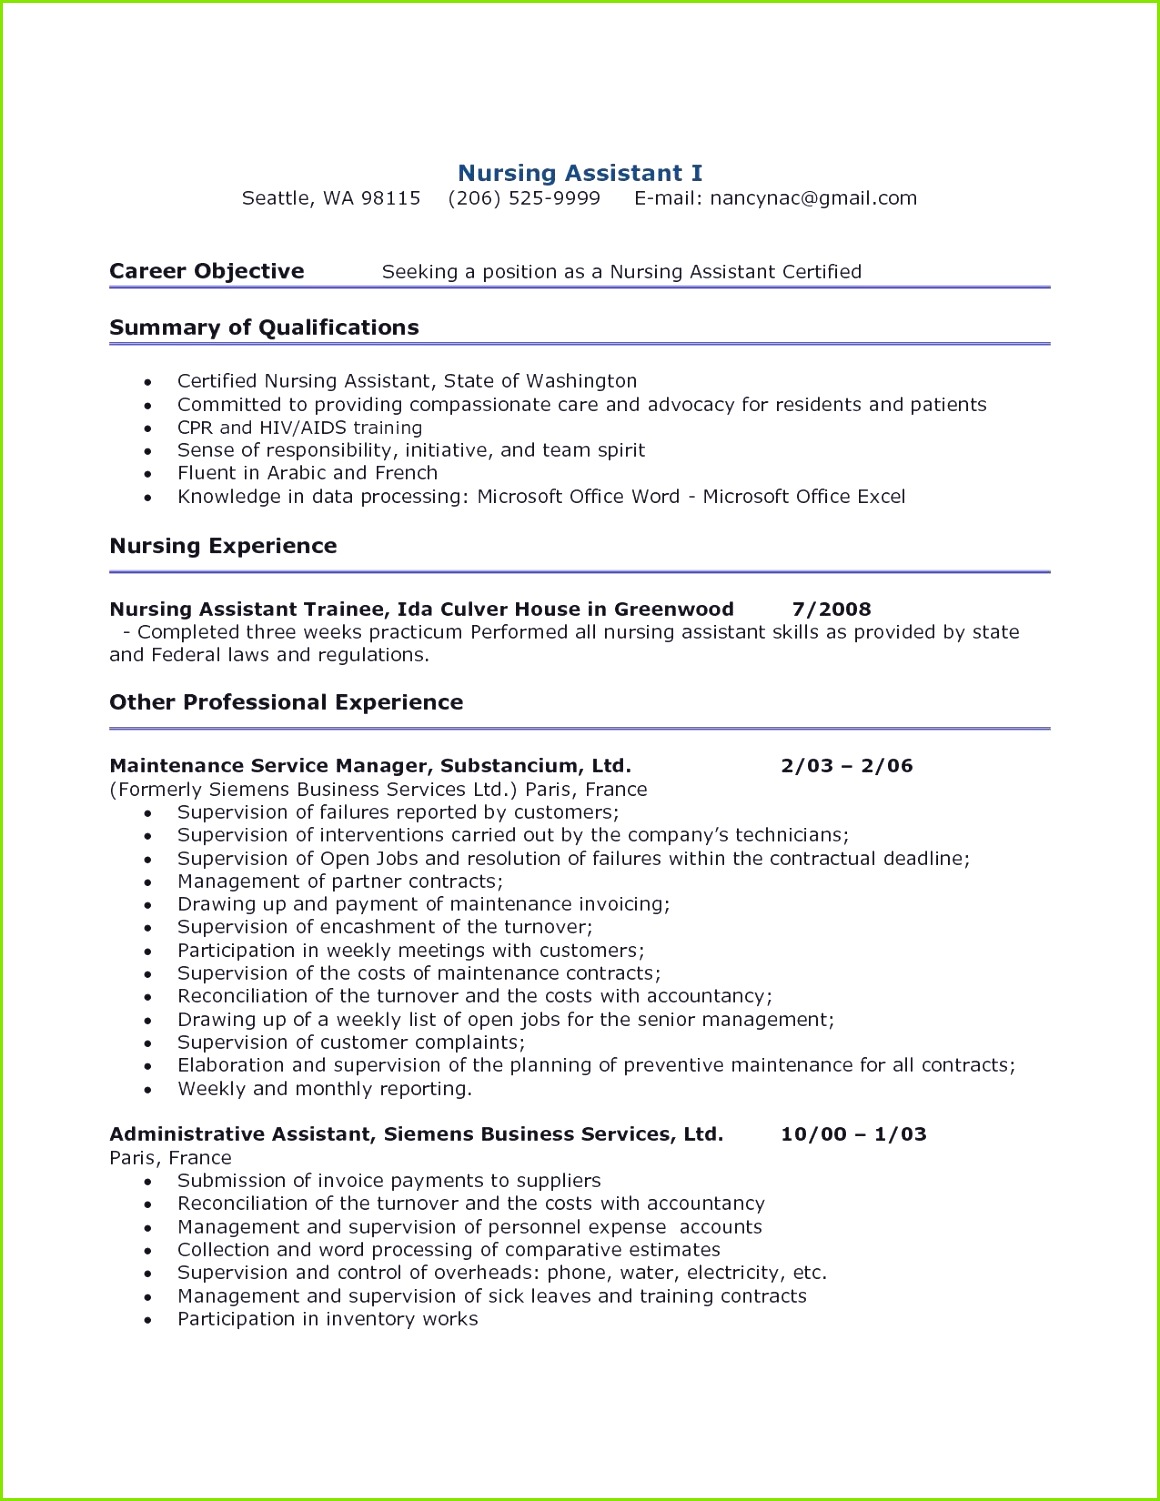 Latest Resume format Recent Resume format Awesome I Pinimg 1200x Da 0d 1a Shalomhouse Inspirational Free